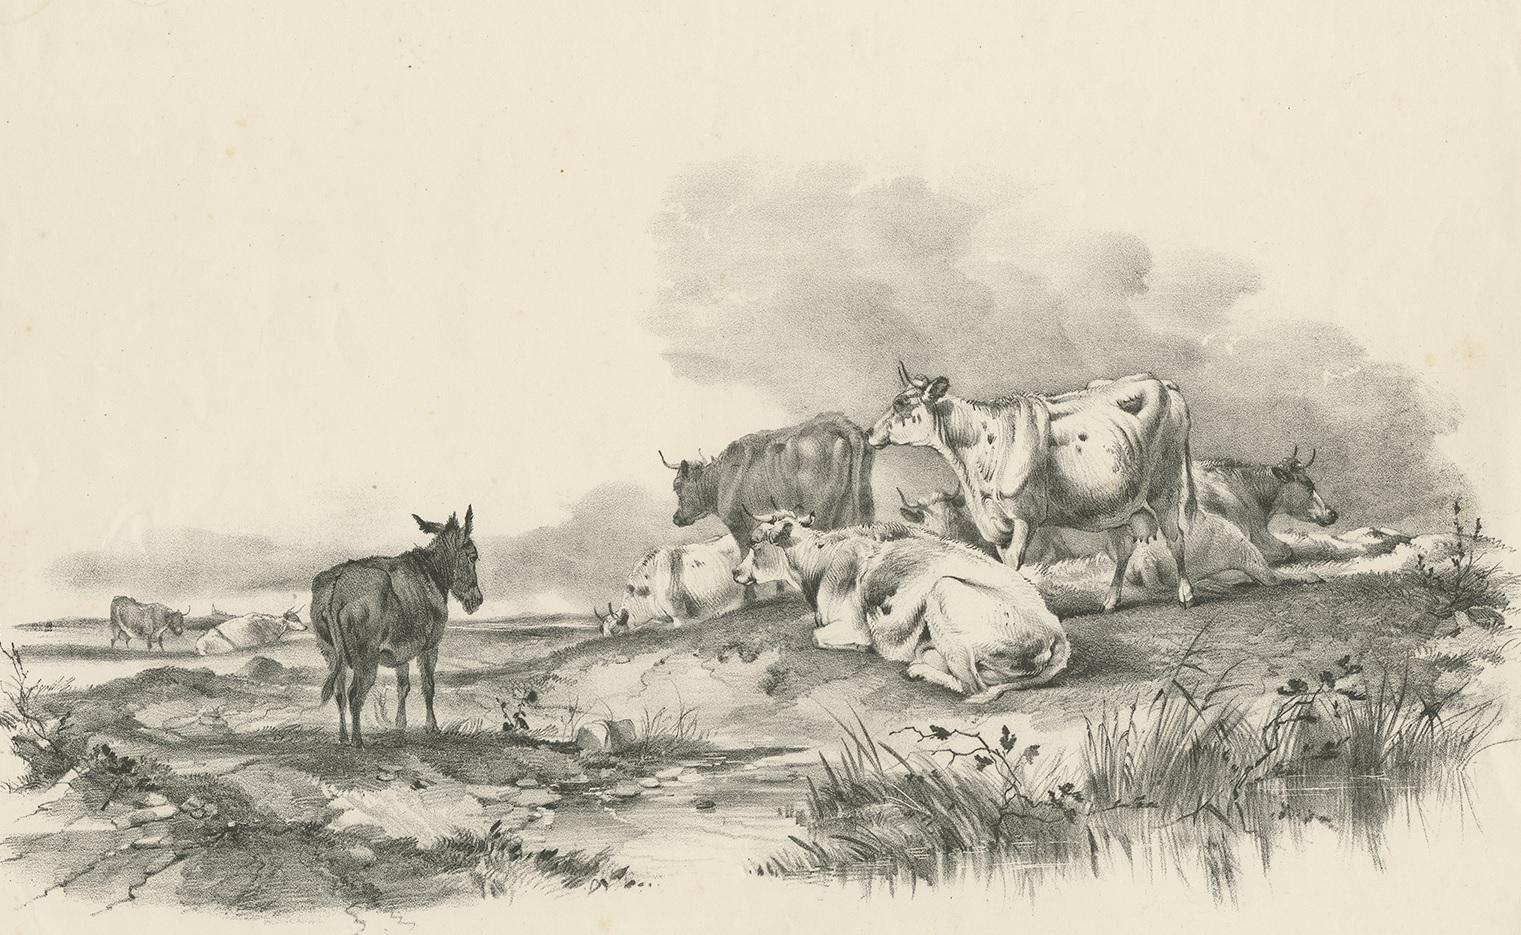 Antique print of cattle and a donkey. This print originates from 'Cattle Subjects' by Thomas Sidney Cooper. He was an English landscape painter noted for his images of cattle and farm animals.